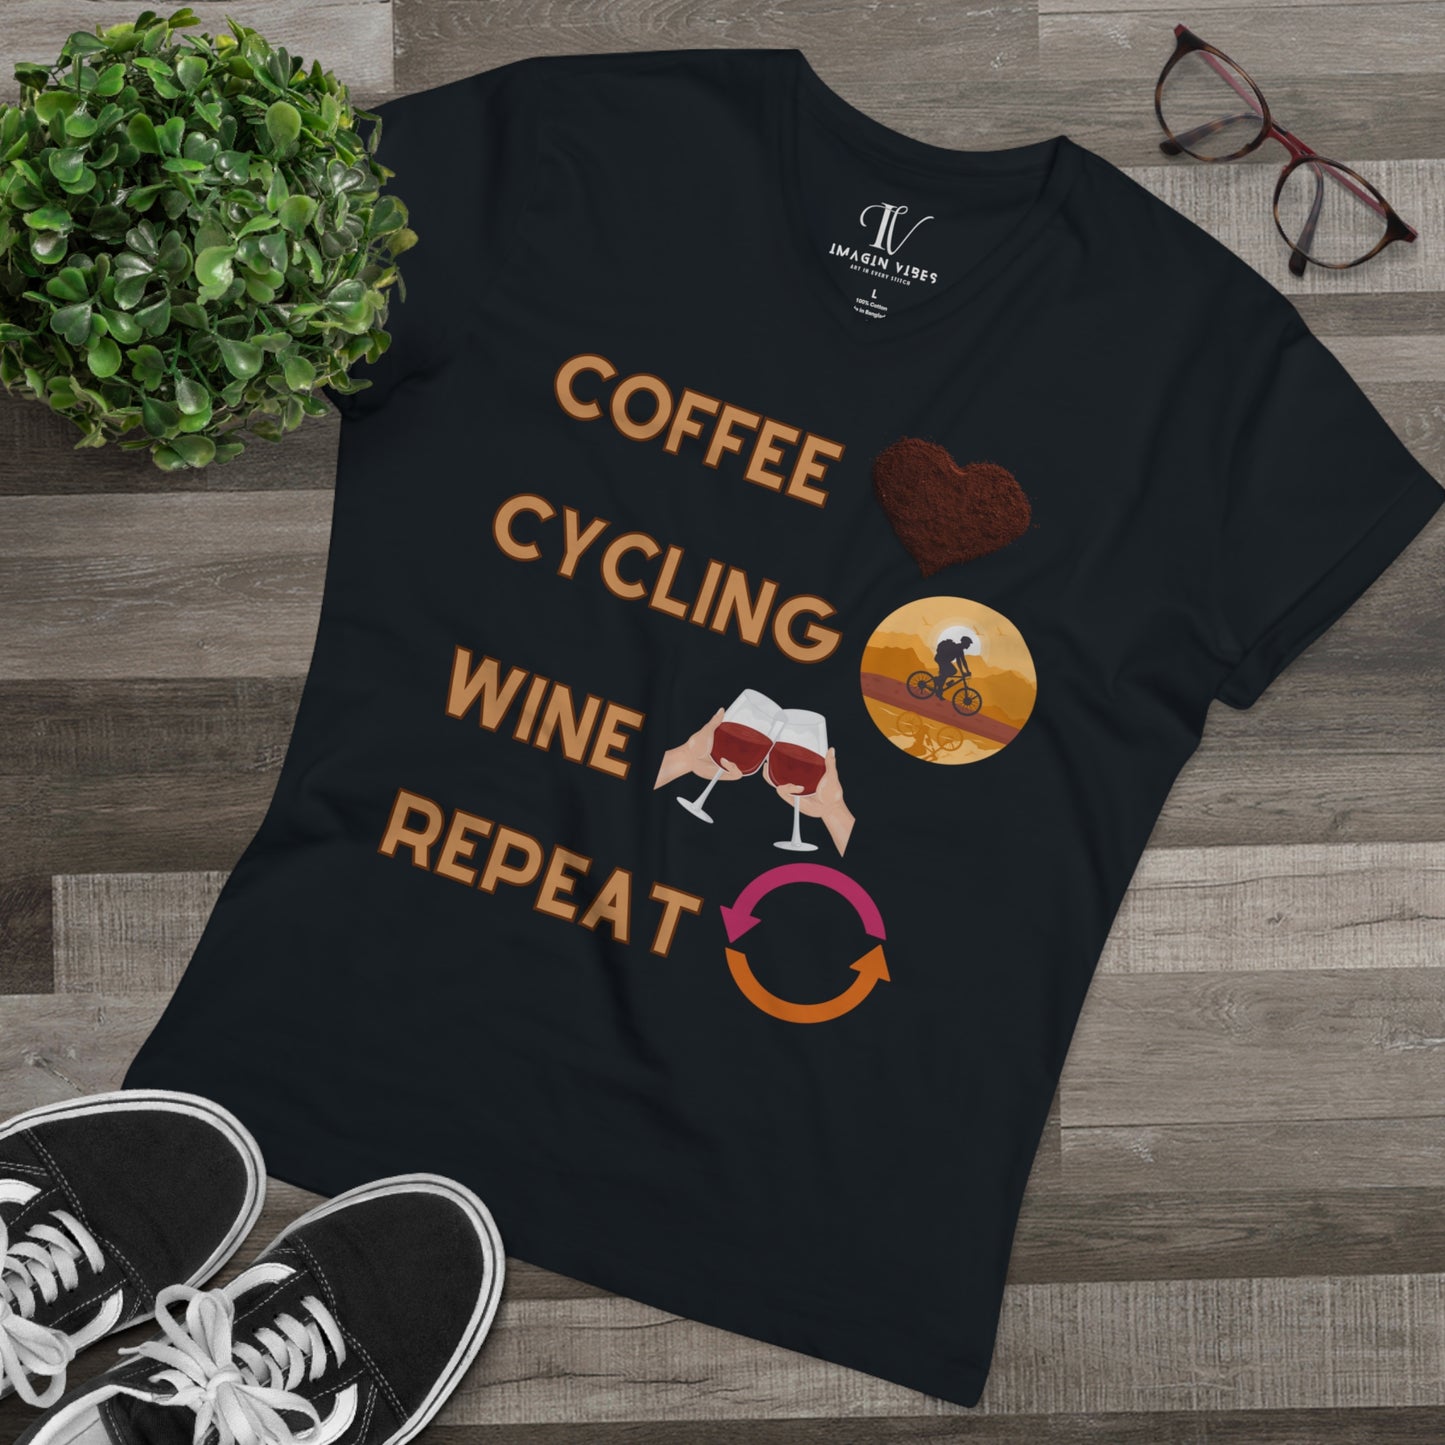 Minimalistic Bicycle T-Shirt for Men - Cotton Shirts, Eco-Friendly Gift for Coffee and Cycling Enthusiasts V-neck Black S 